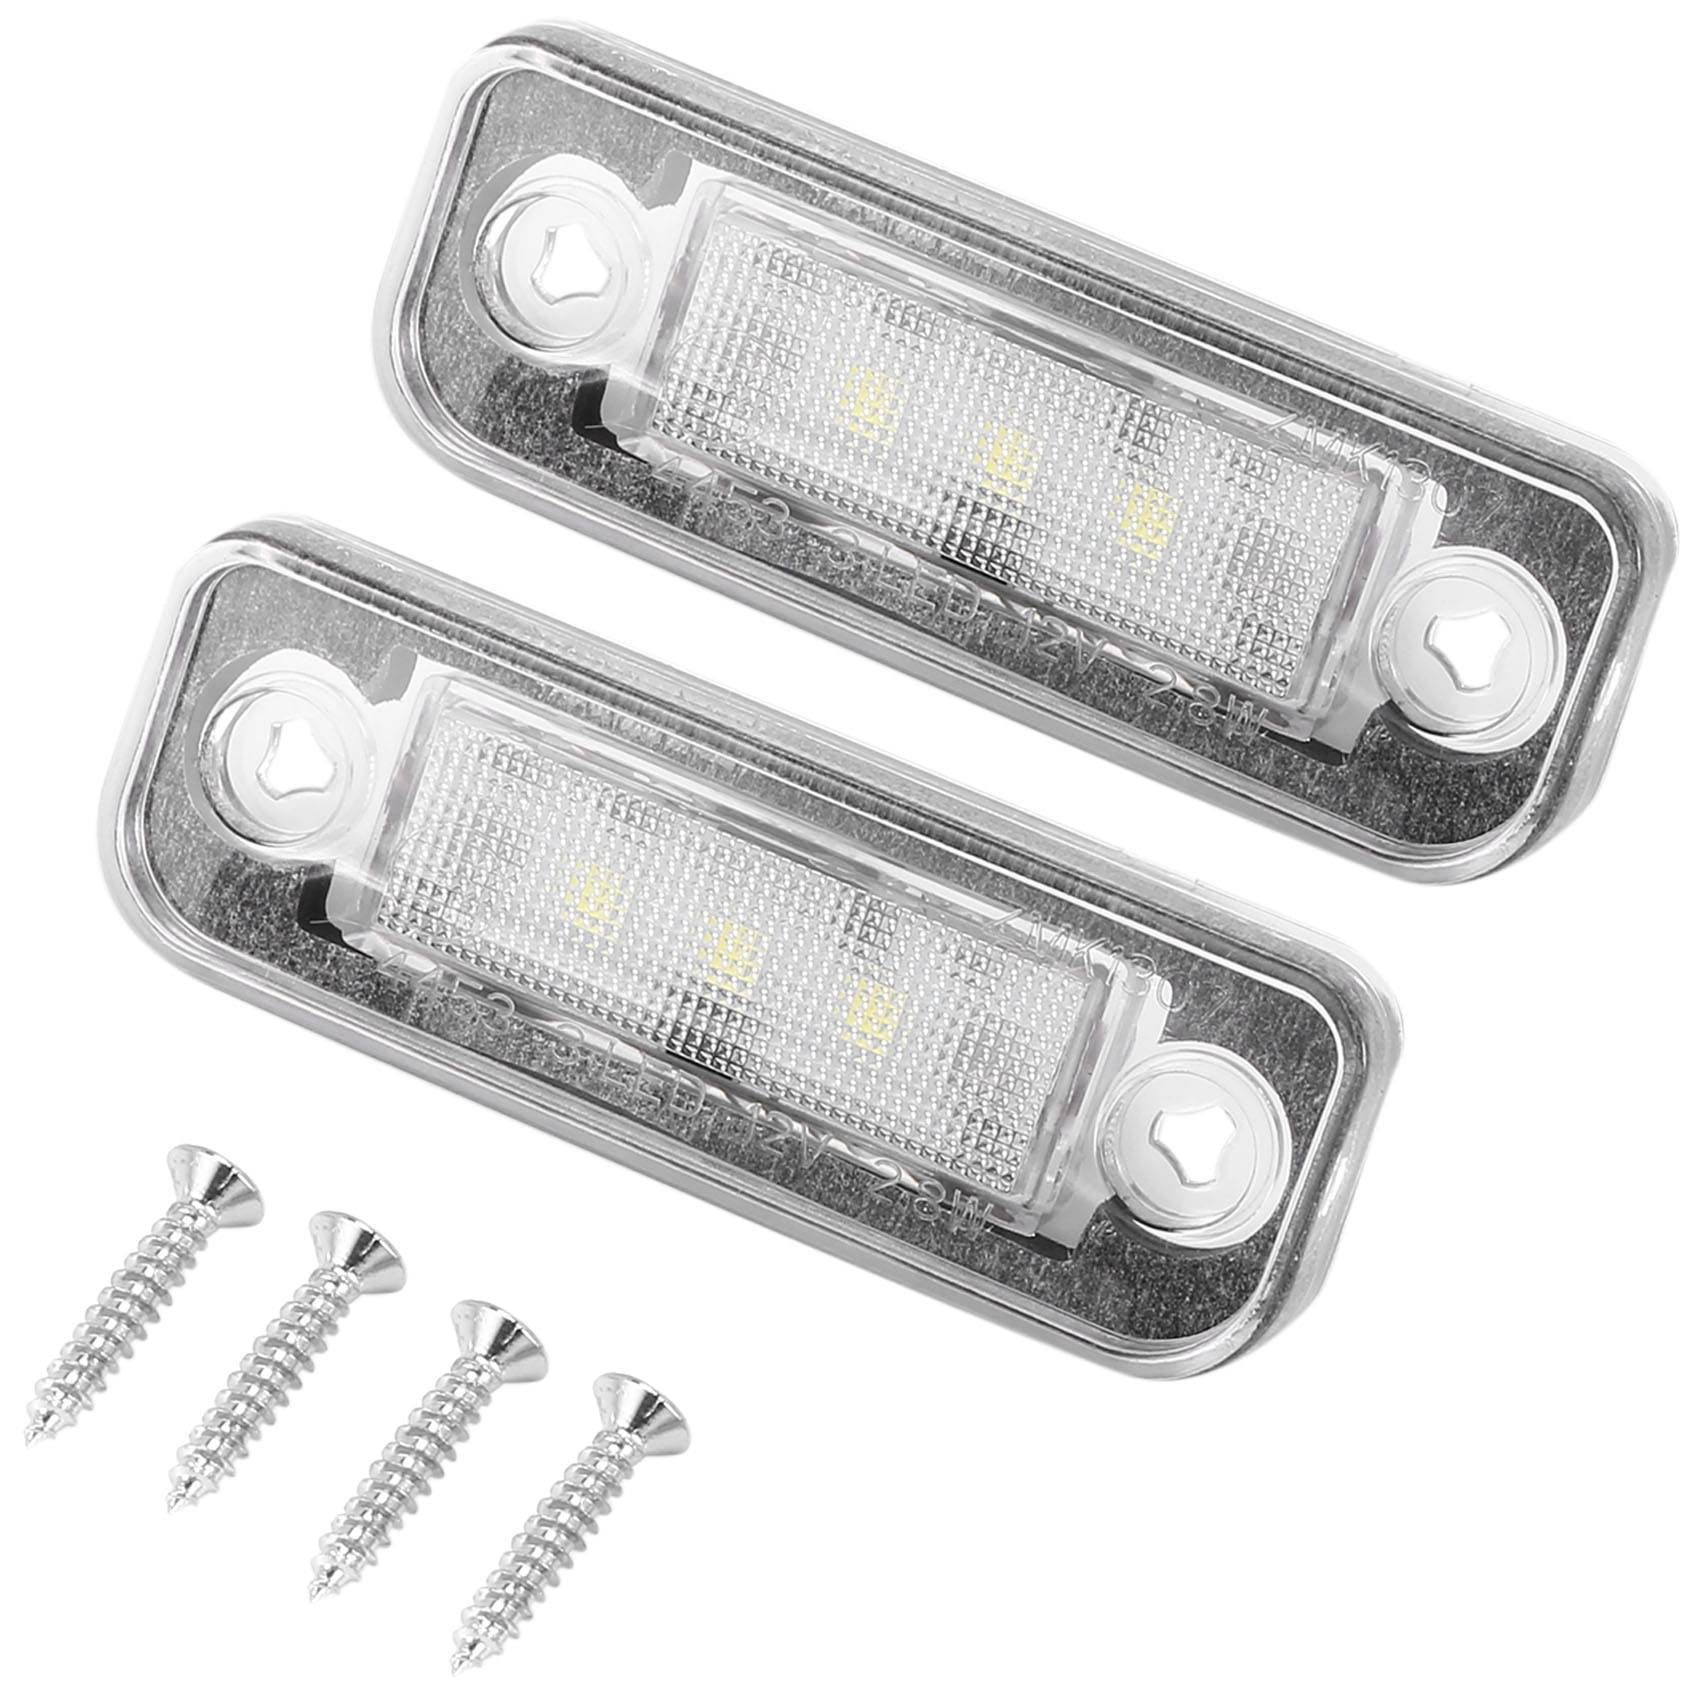 LED License Plate Light Lamp Error Free For Mercedes Benz W203 5D W211 W219 R171